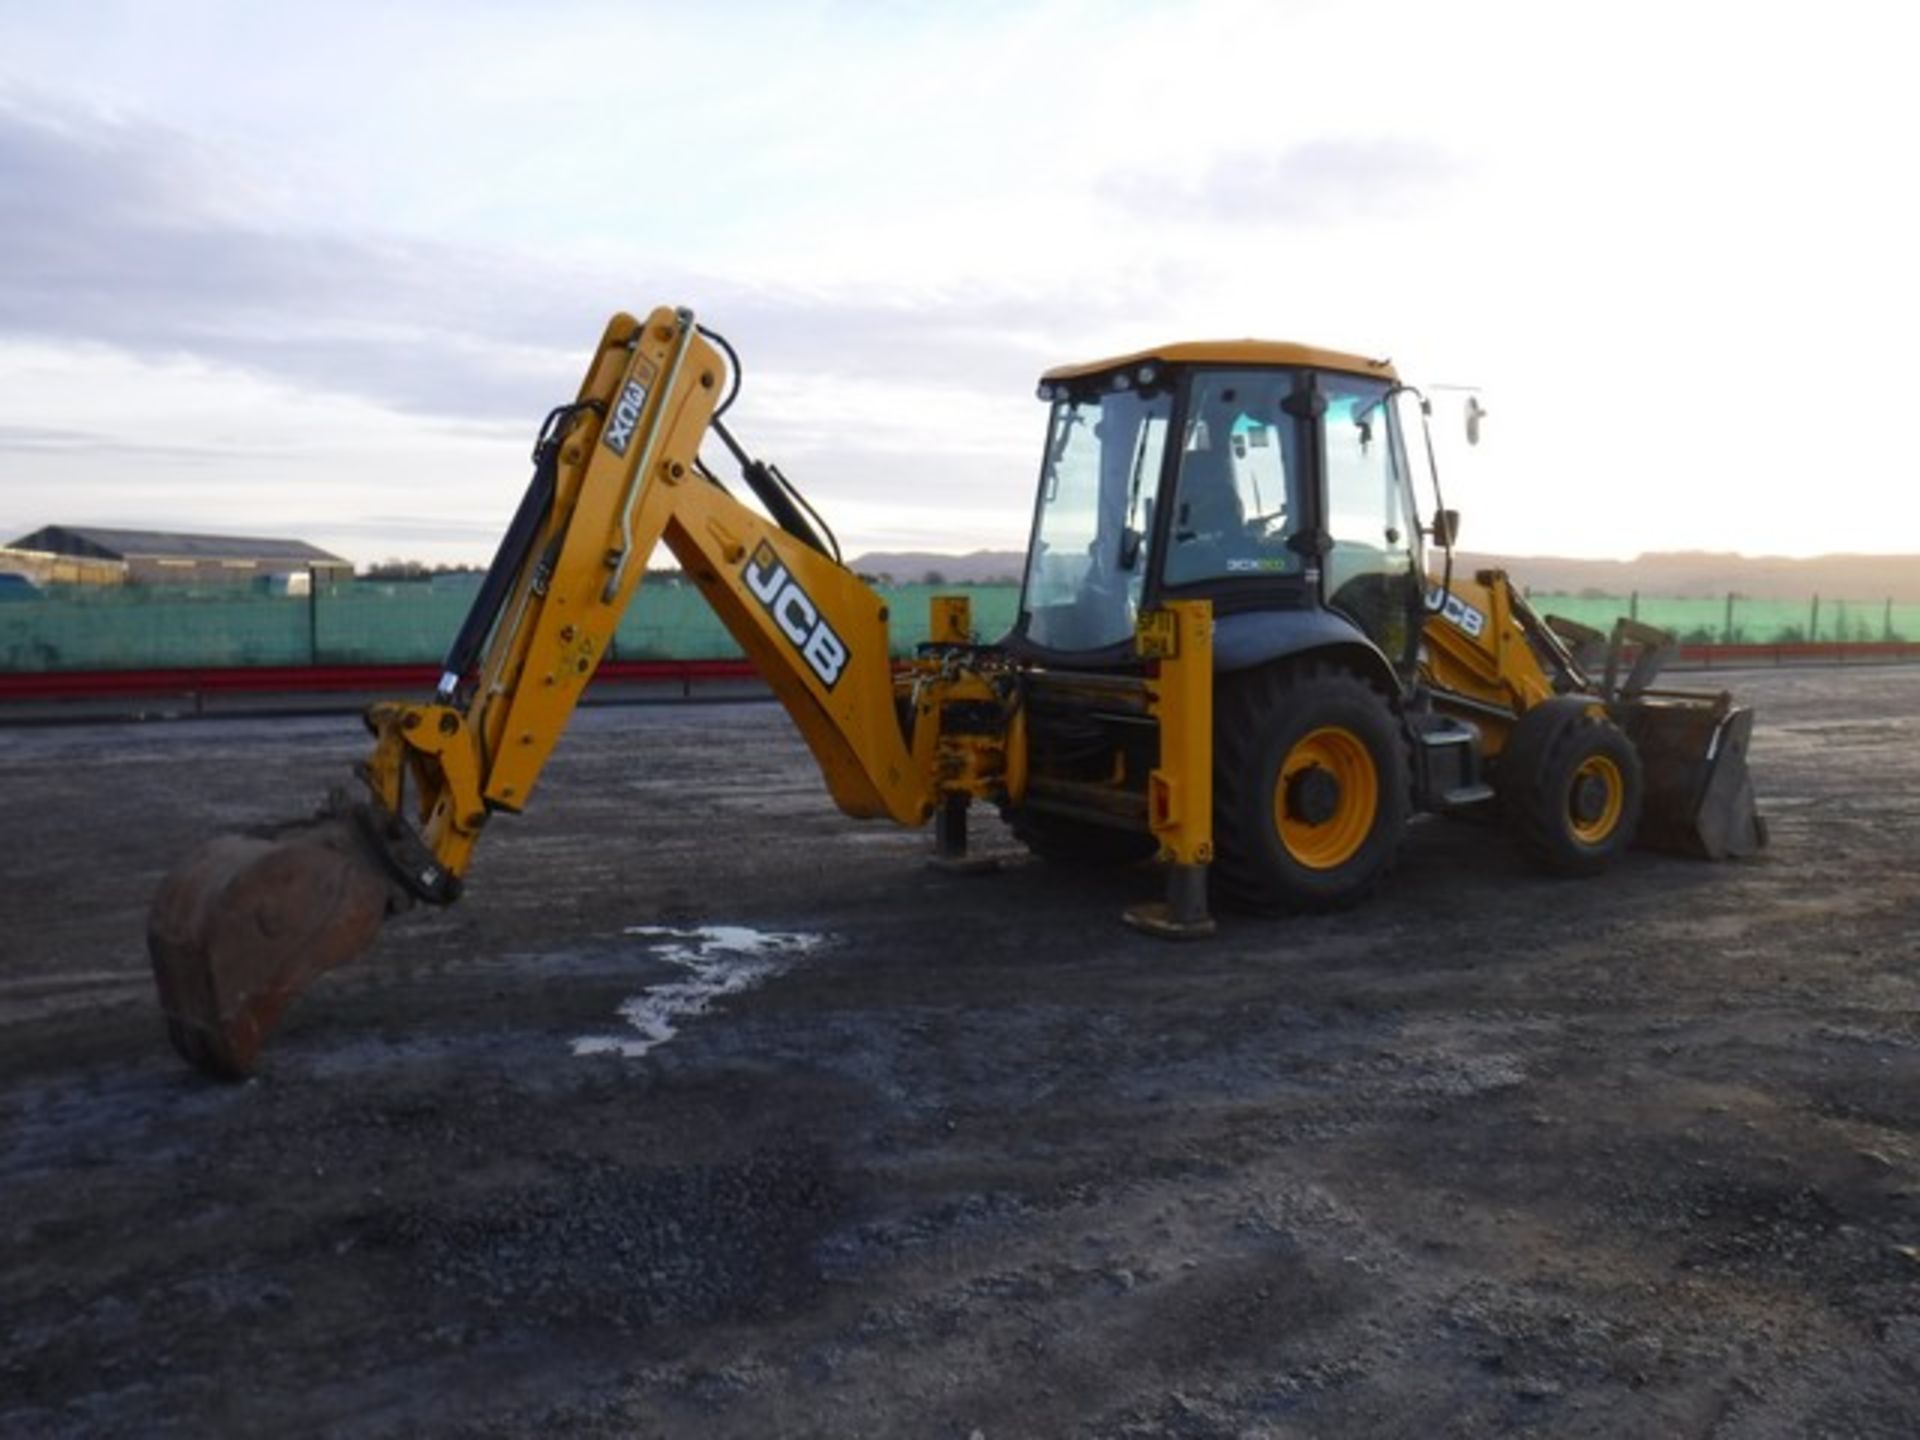 2011 JCB 3CX ECO 4 in 1 bucket S/N JCB3CX4TP02008318 - 6175 hrs (not verified) - Image 4 of 14